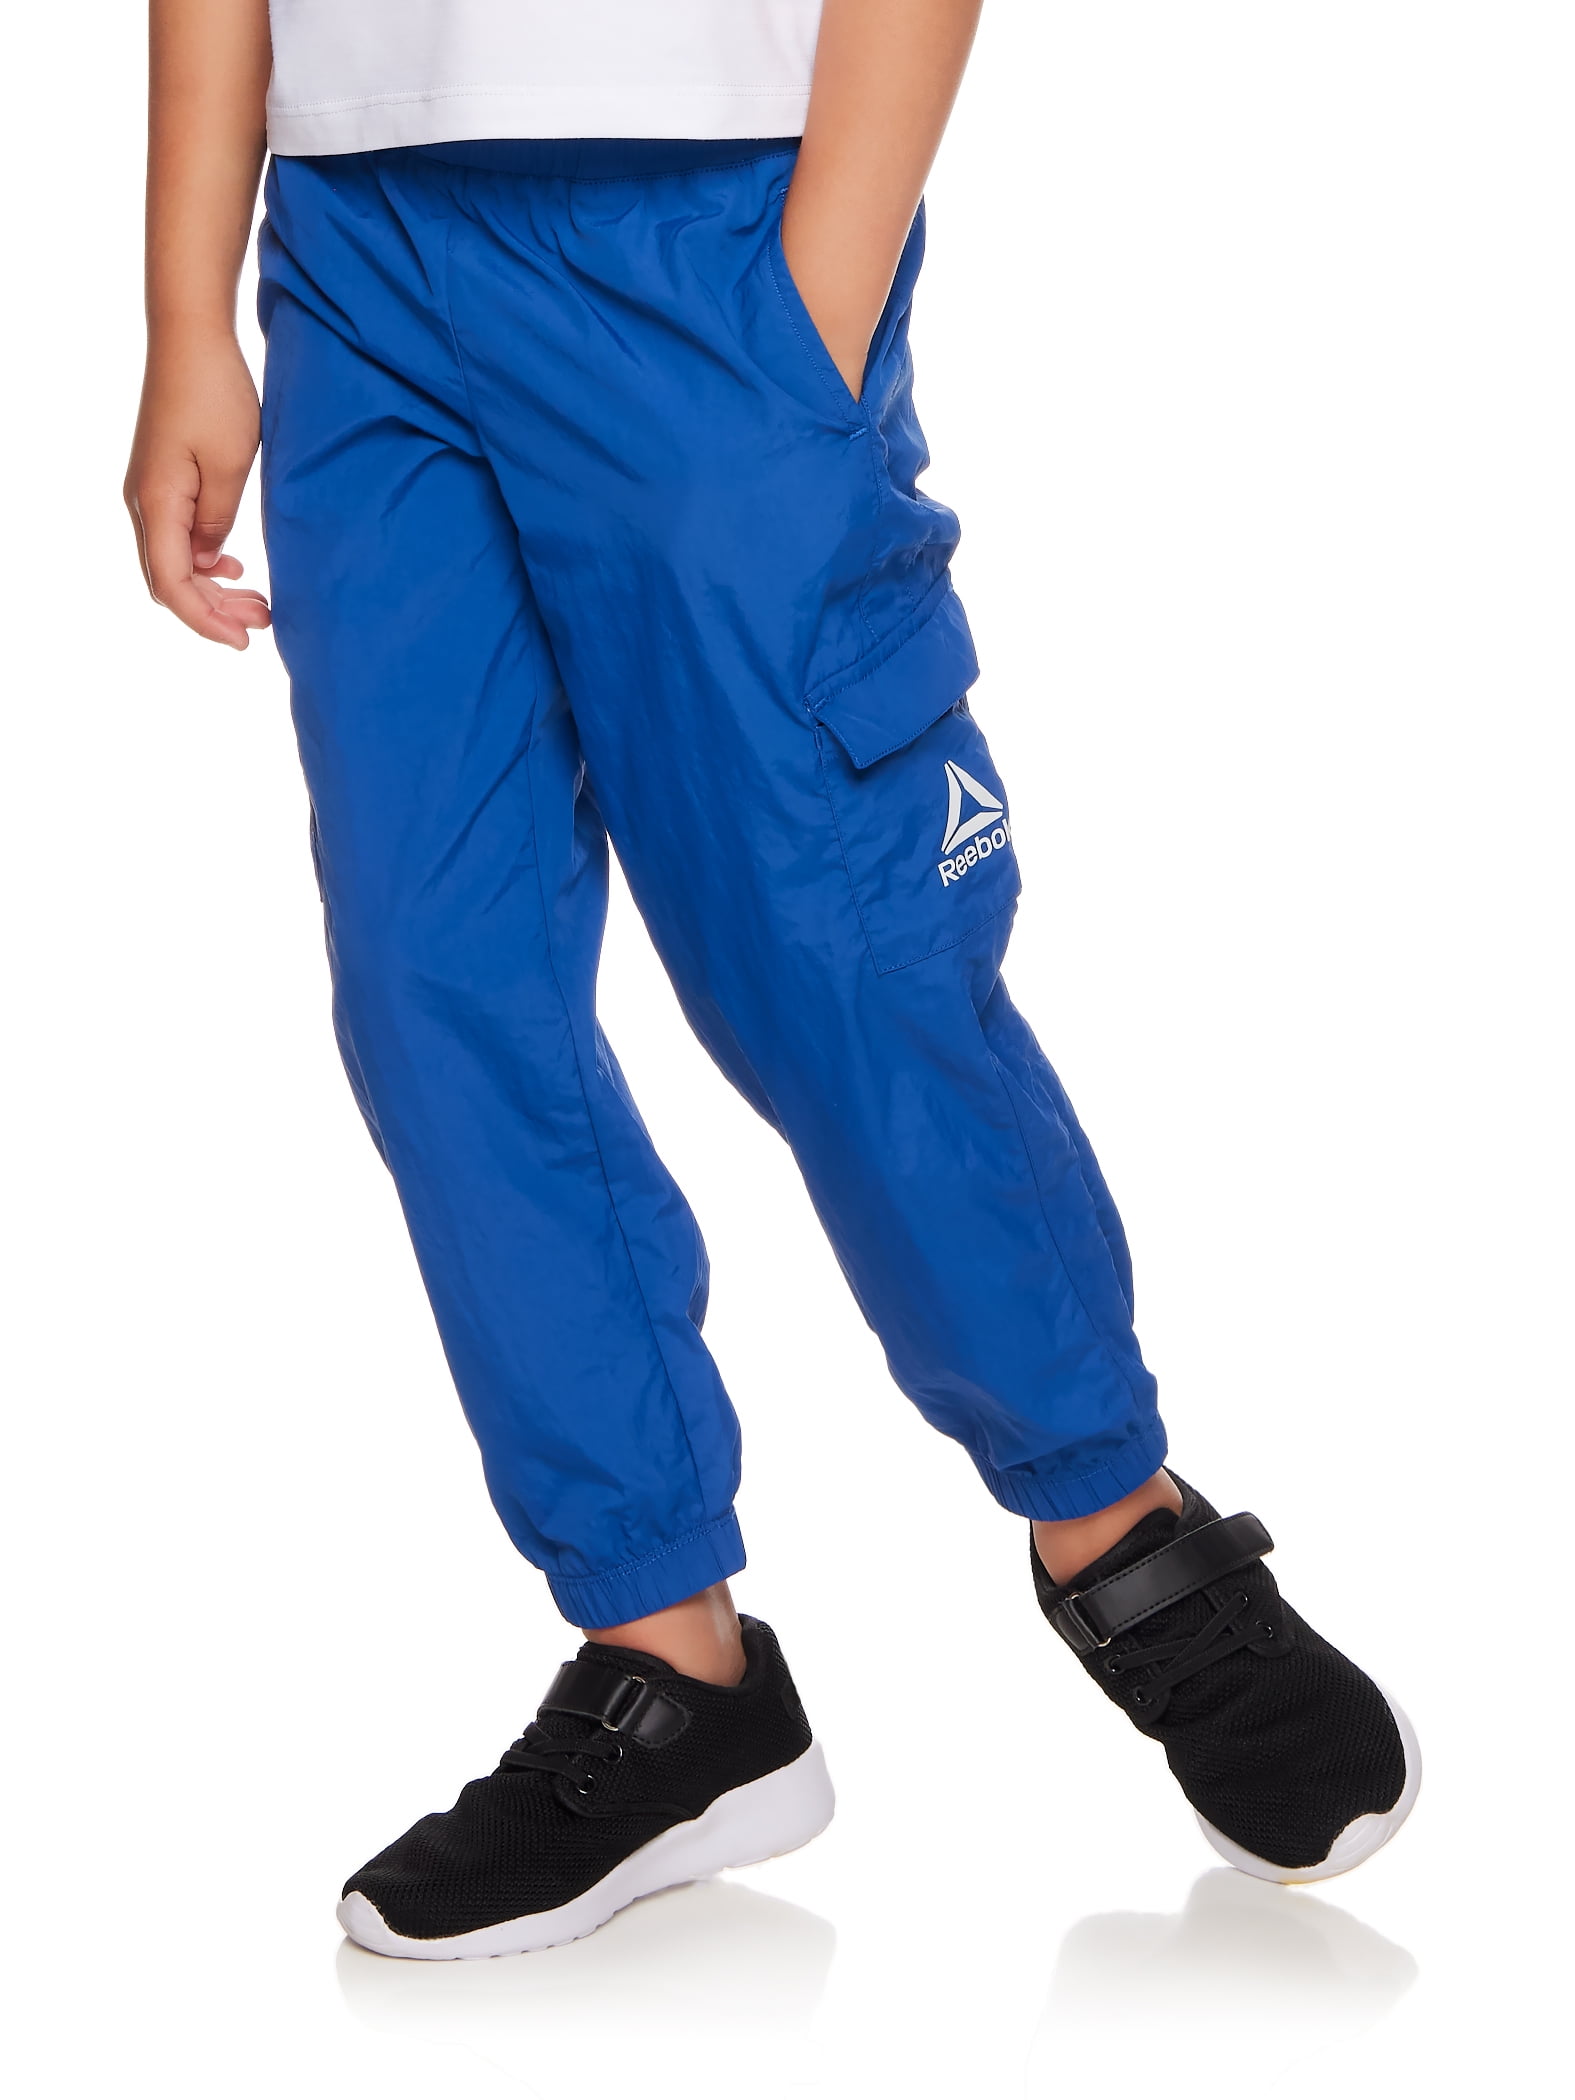 Reebok Girl's Swift Track Pant with Pockets, Sizes 4-18 